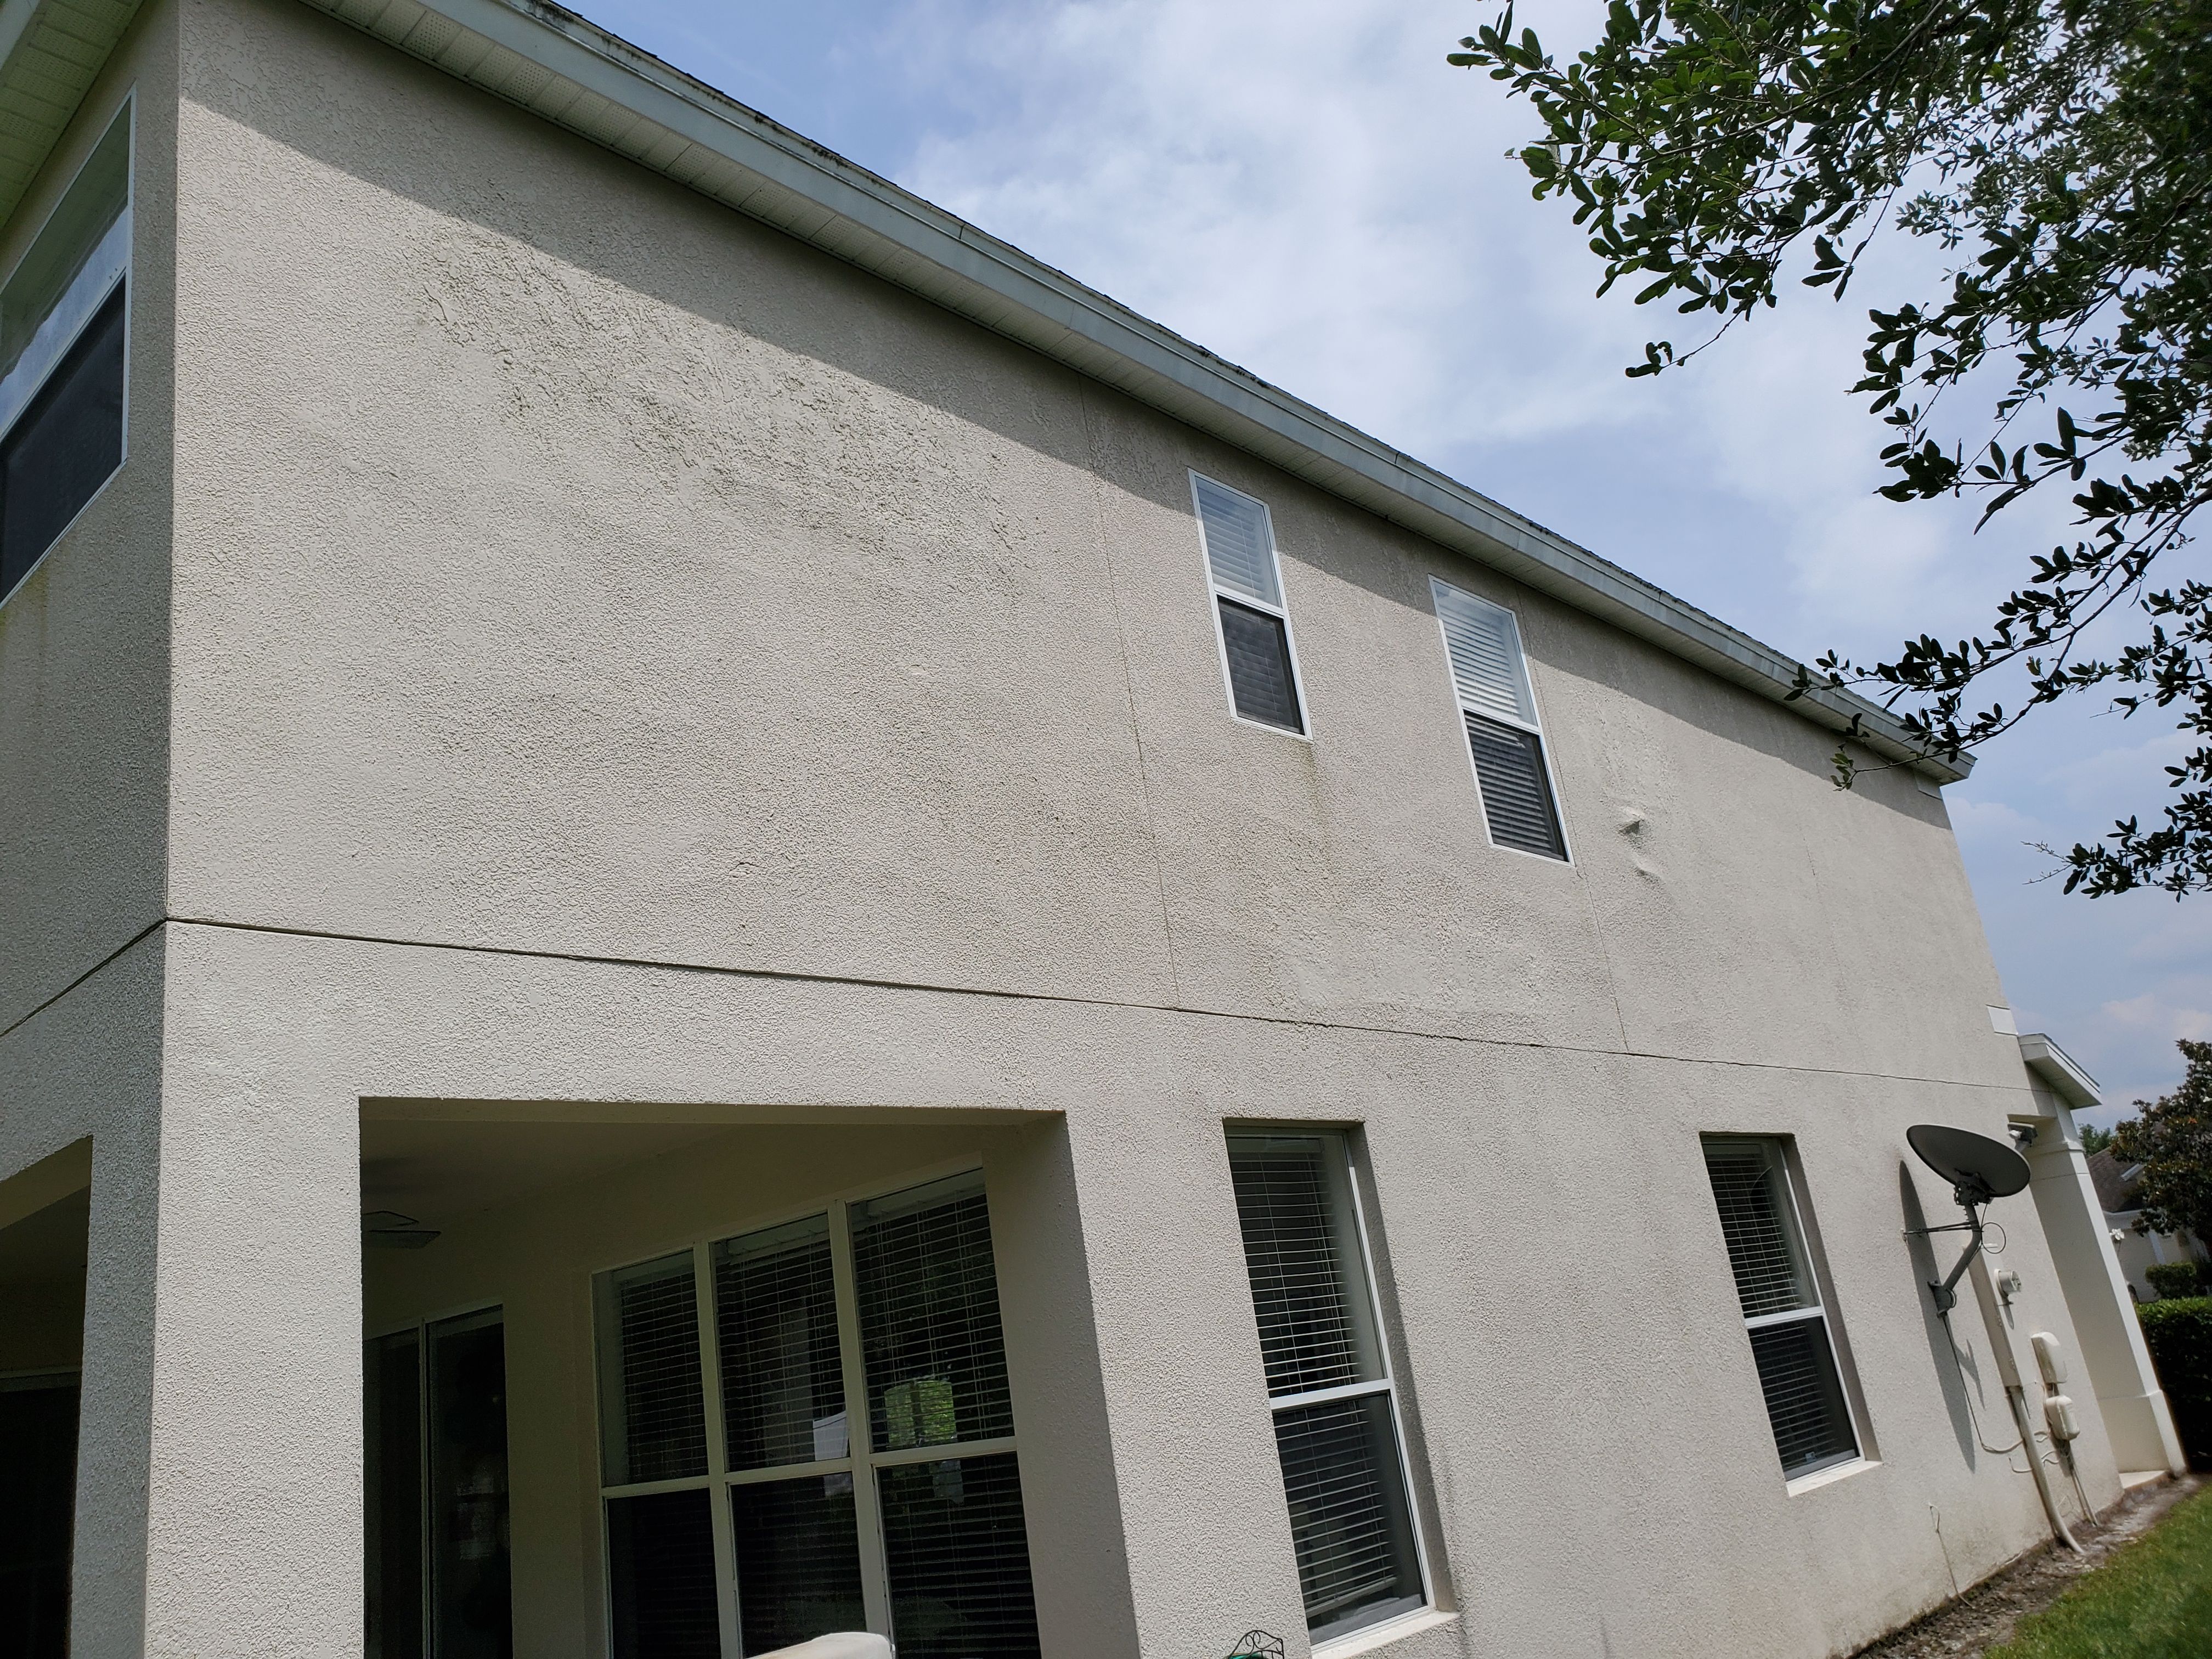 Our Past Work for Best of Orlando Painting & Stucco Inc in Winter Garden, FL